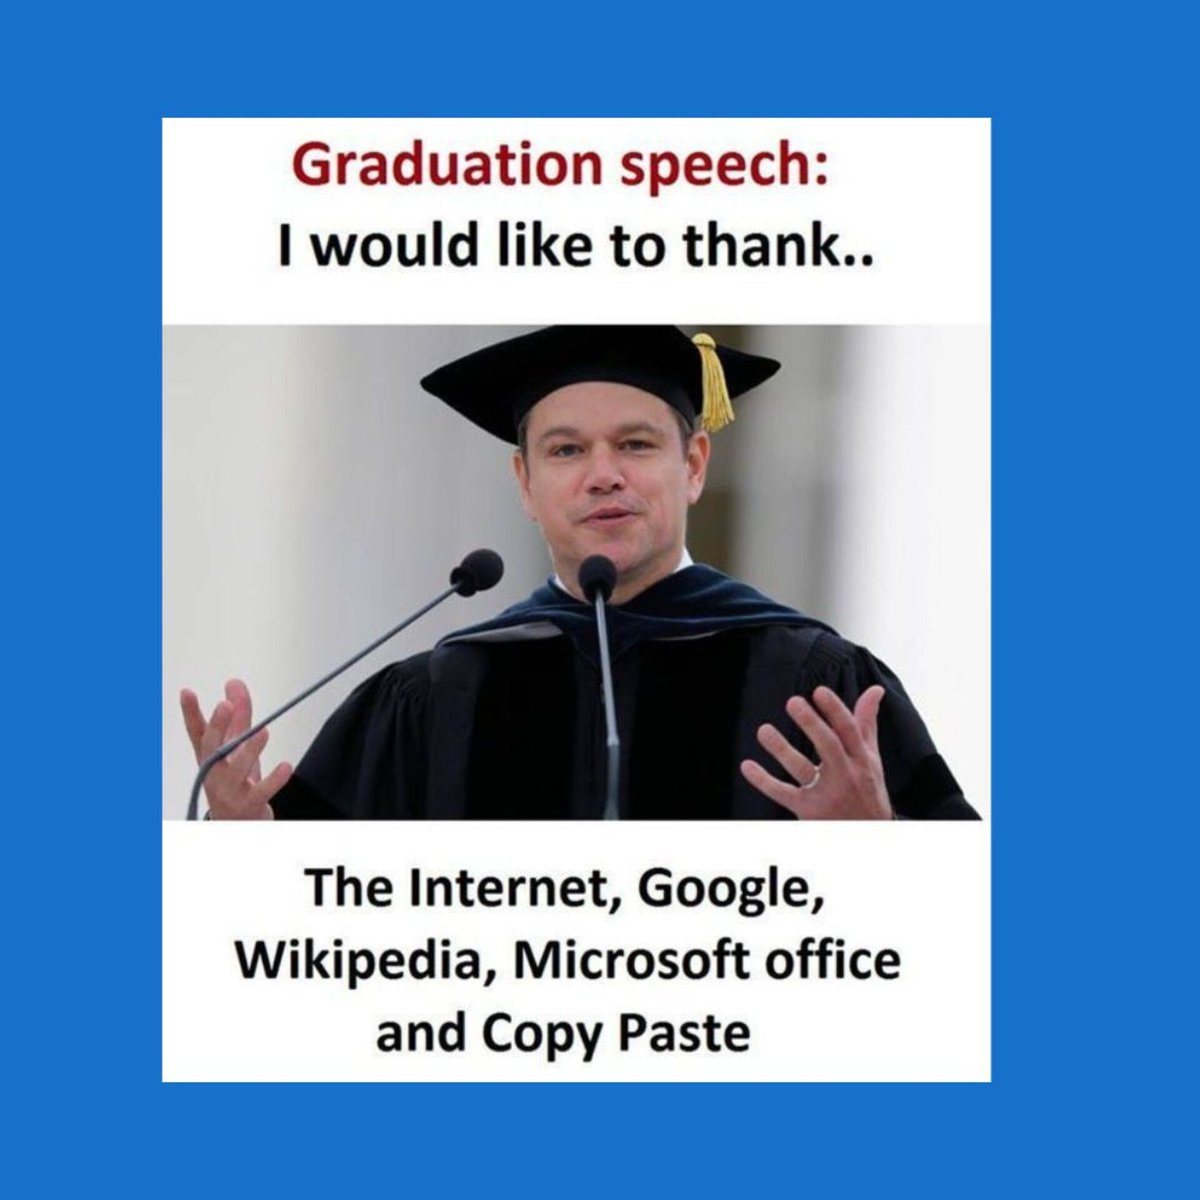 🎓When you're a graduate, the internet becomes your survival tool! Who else can relate? 😂
#RW2 #cad #bim #revit #cadalyst #autodesk #cybersecurity #cybersecuritytraining #cybersecurityprogram #technicalschool #onlineprogram #REVITtraining #CADcourse #CADschool #CADTechschool